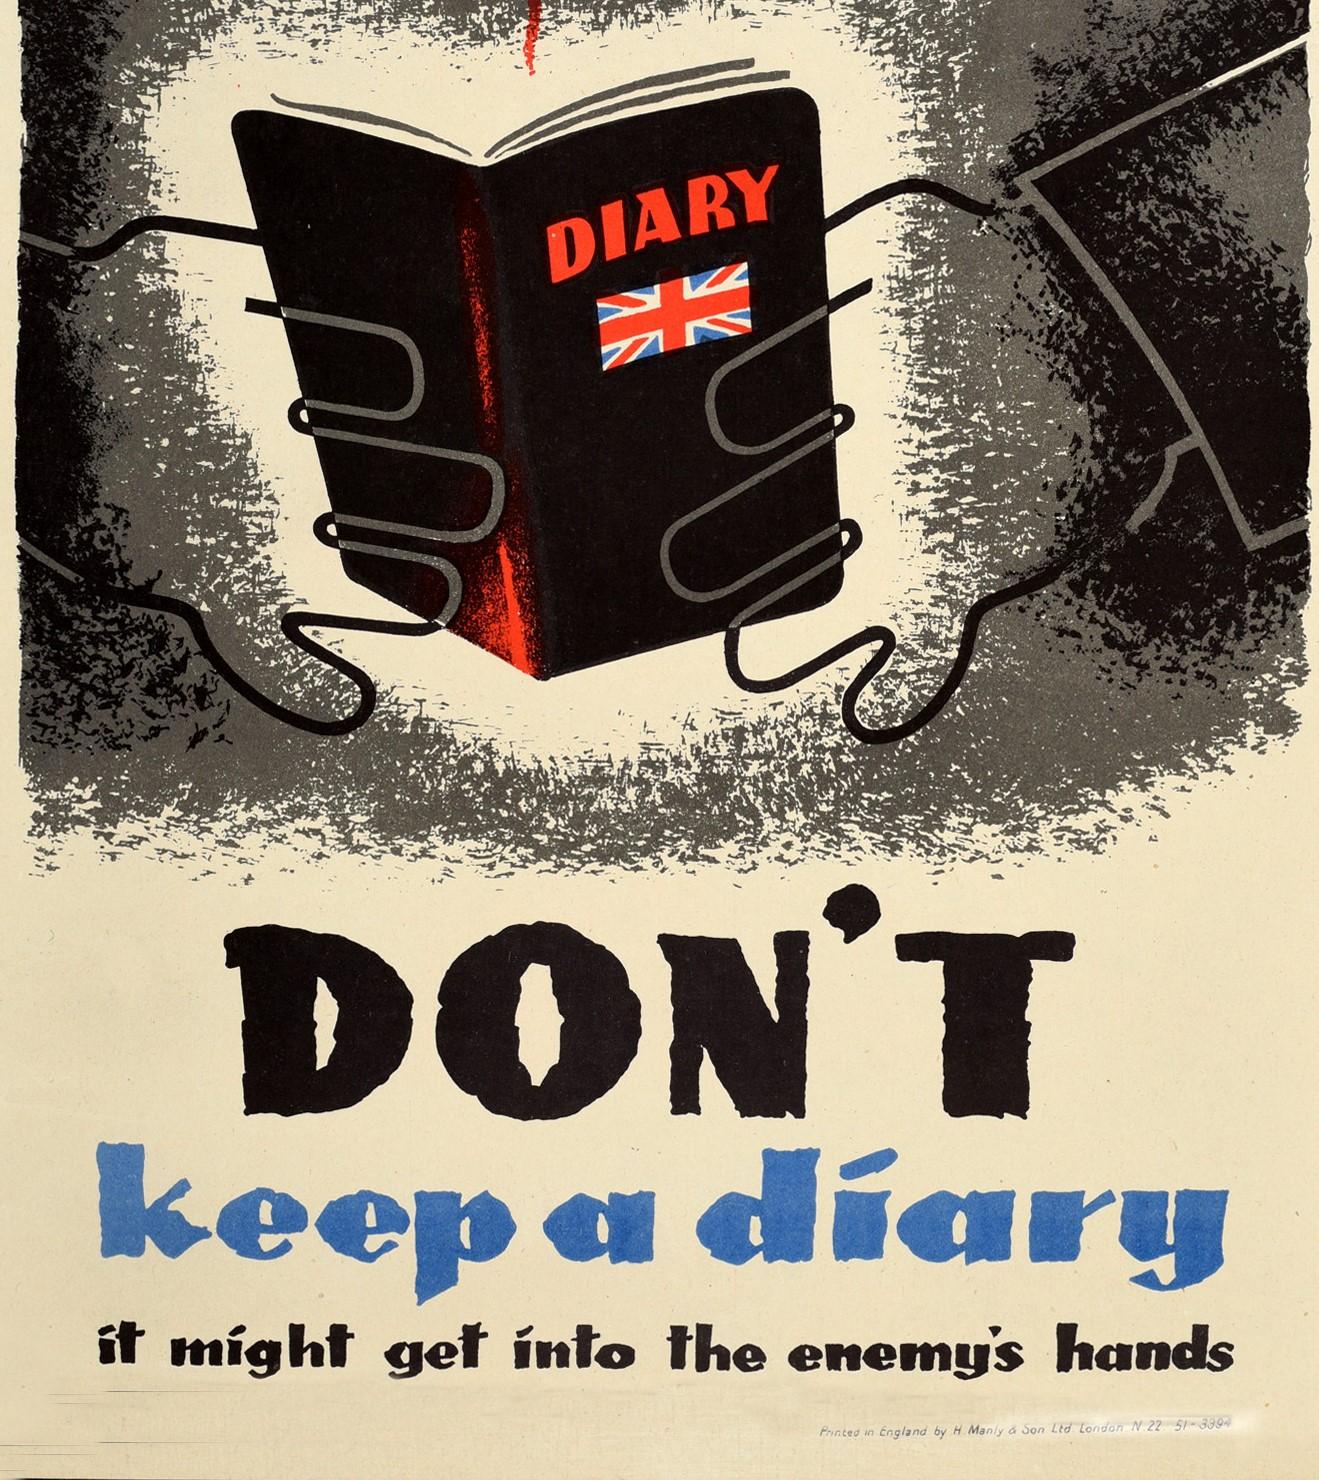 Original vintage World War Two propaganda poster - Don't keep a diary It might get into the enemy’s hands - depicting a man in a German Nazi uniform in shades of black, white and grey with an open diary glowing with information in his hands